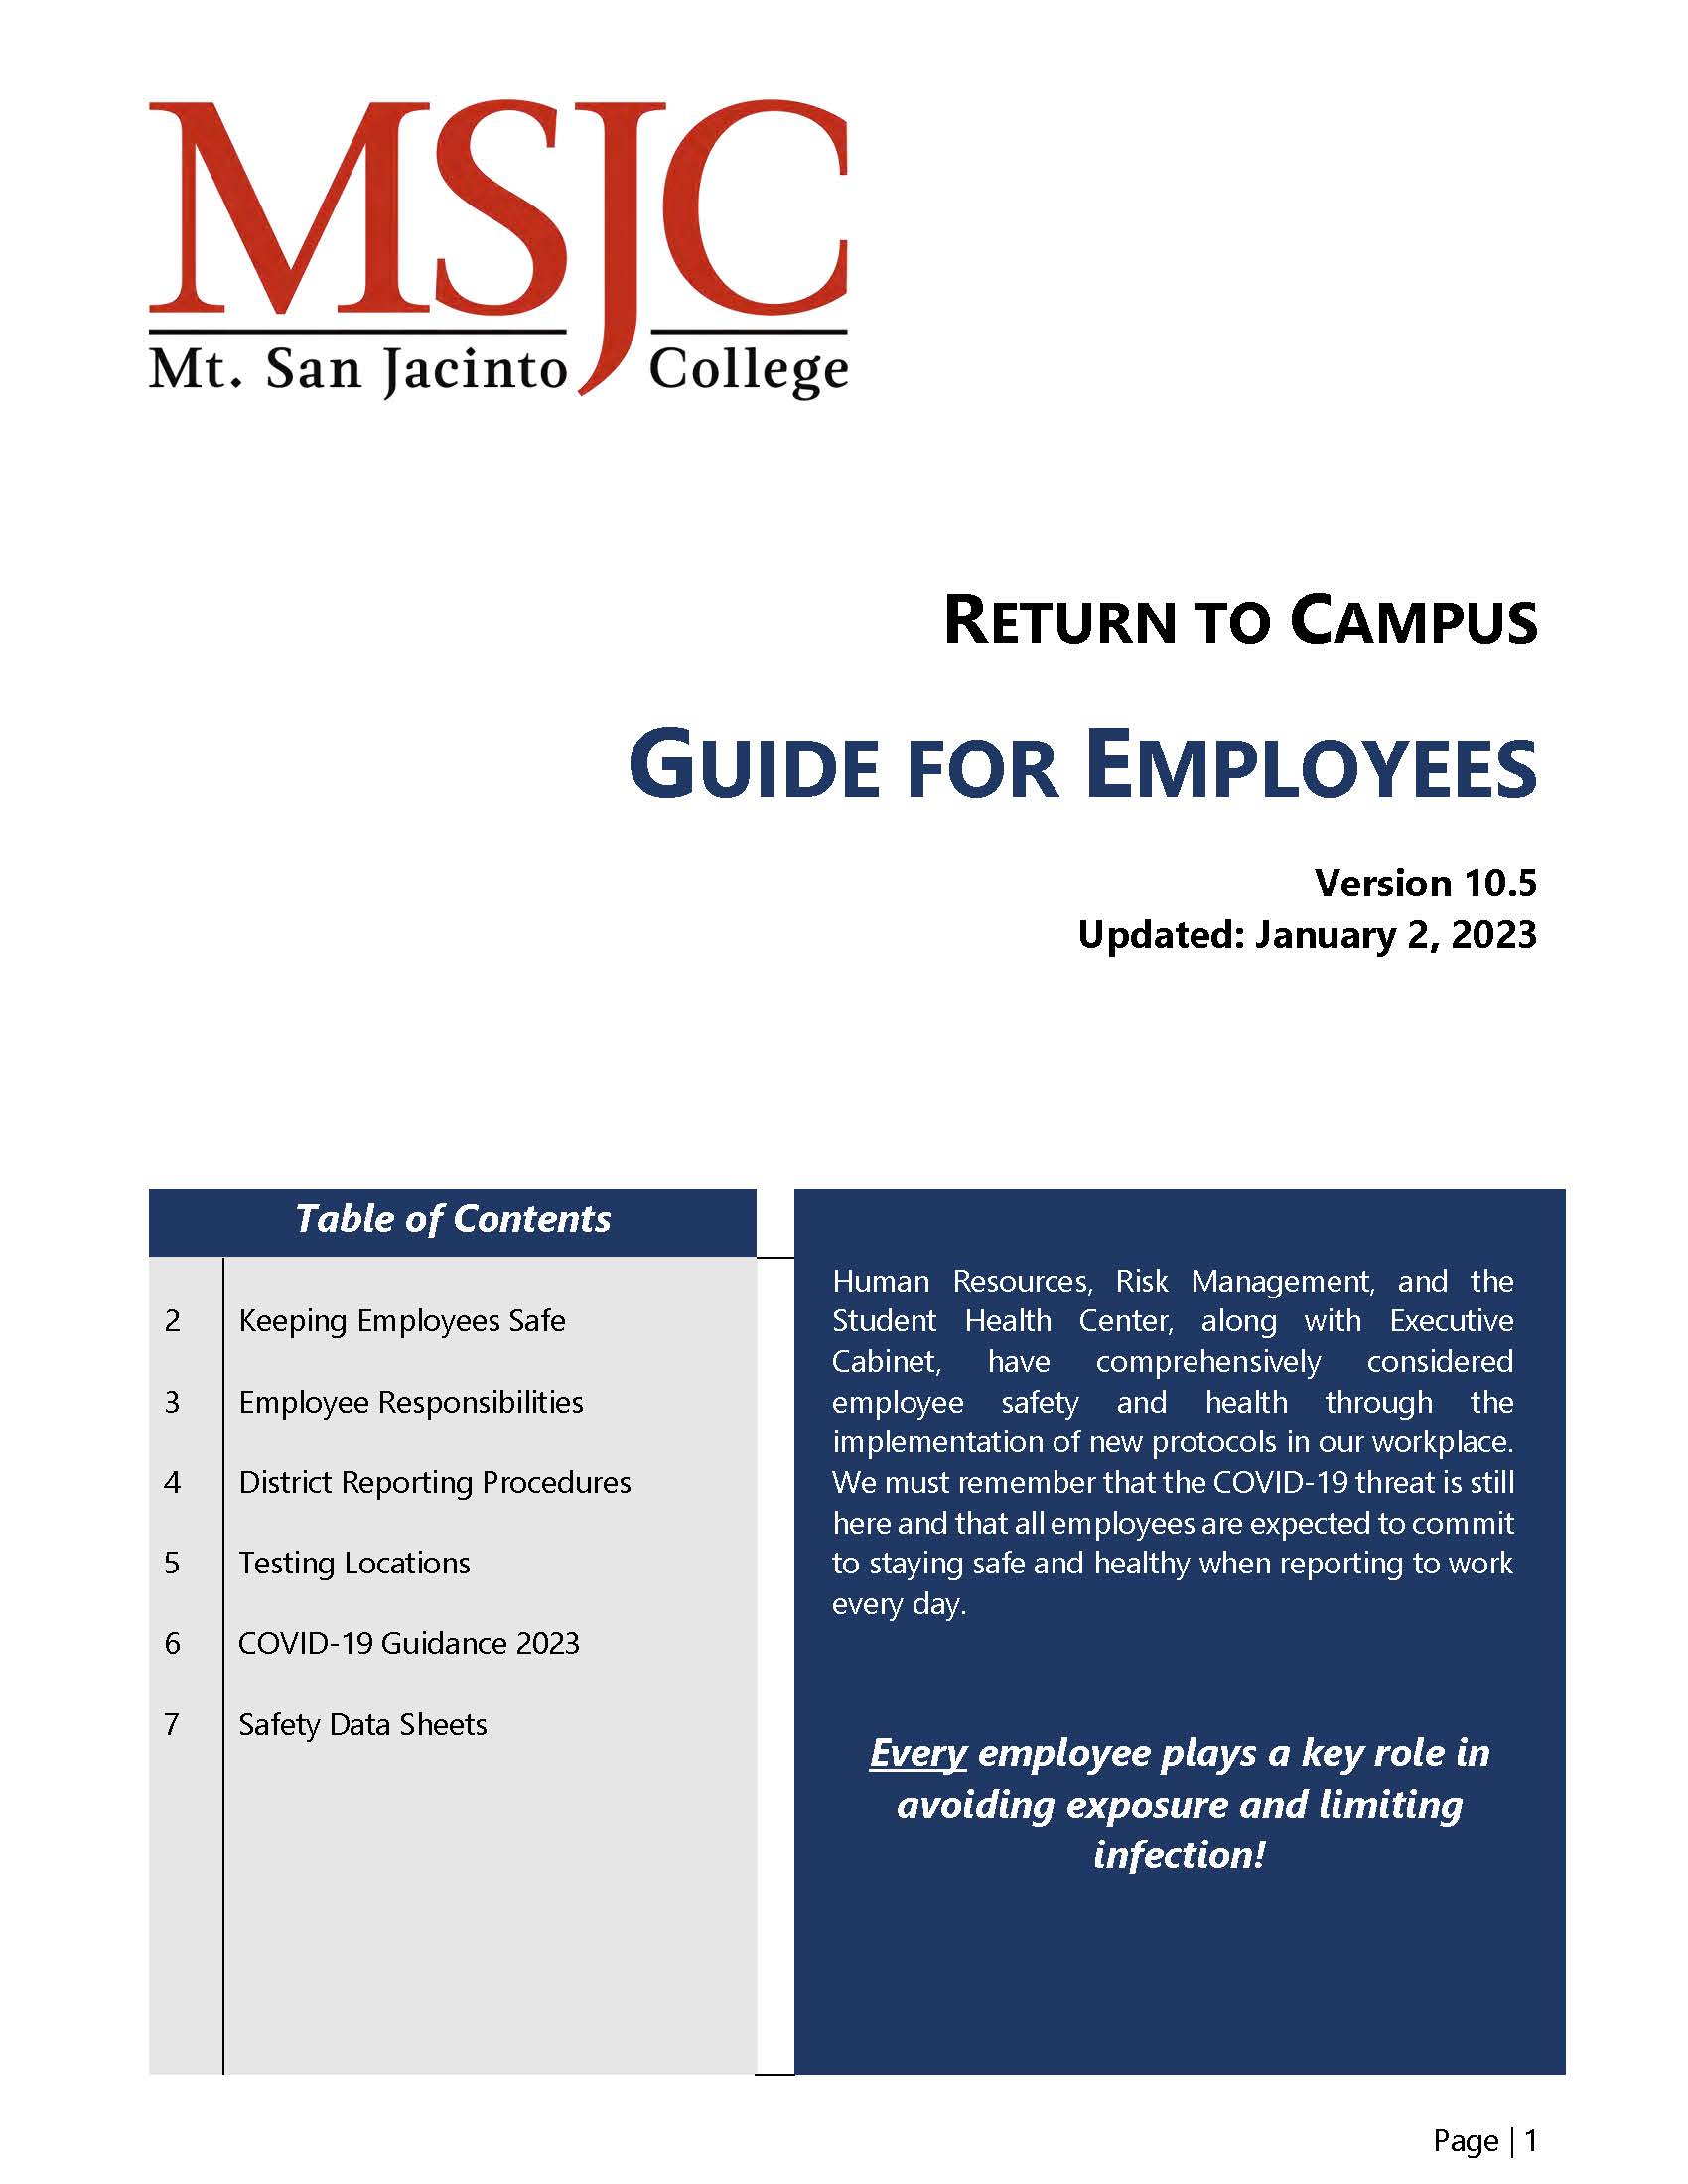 Return to Campus Guide